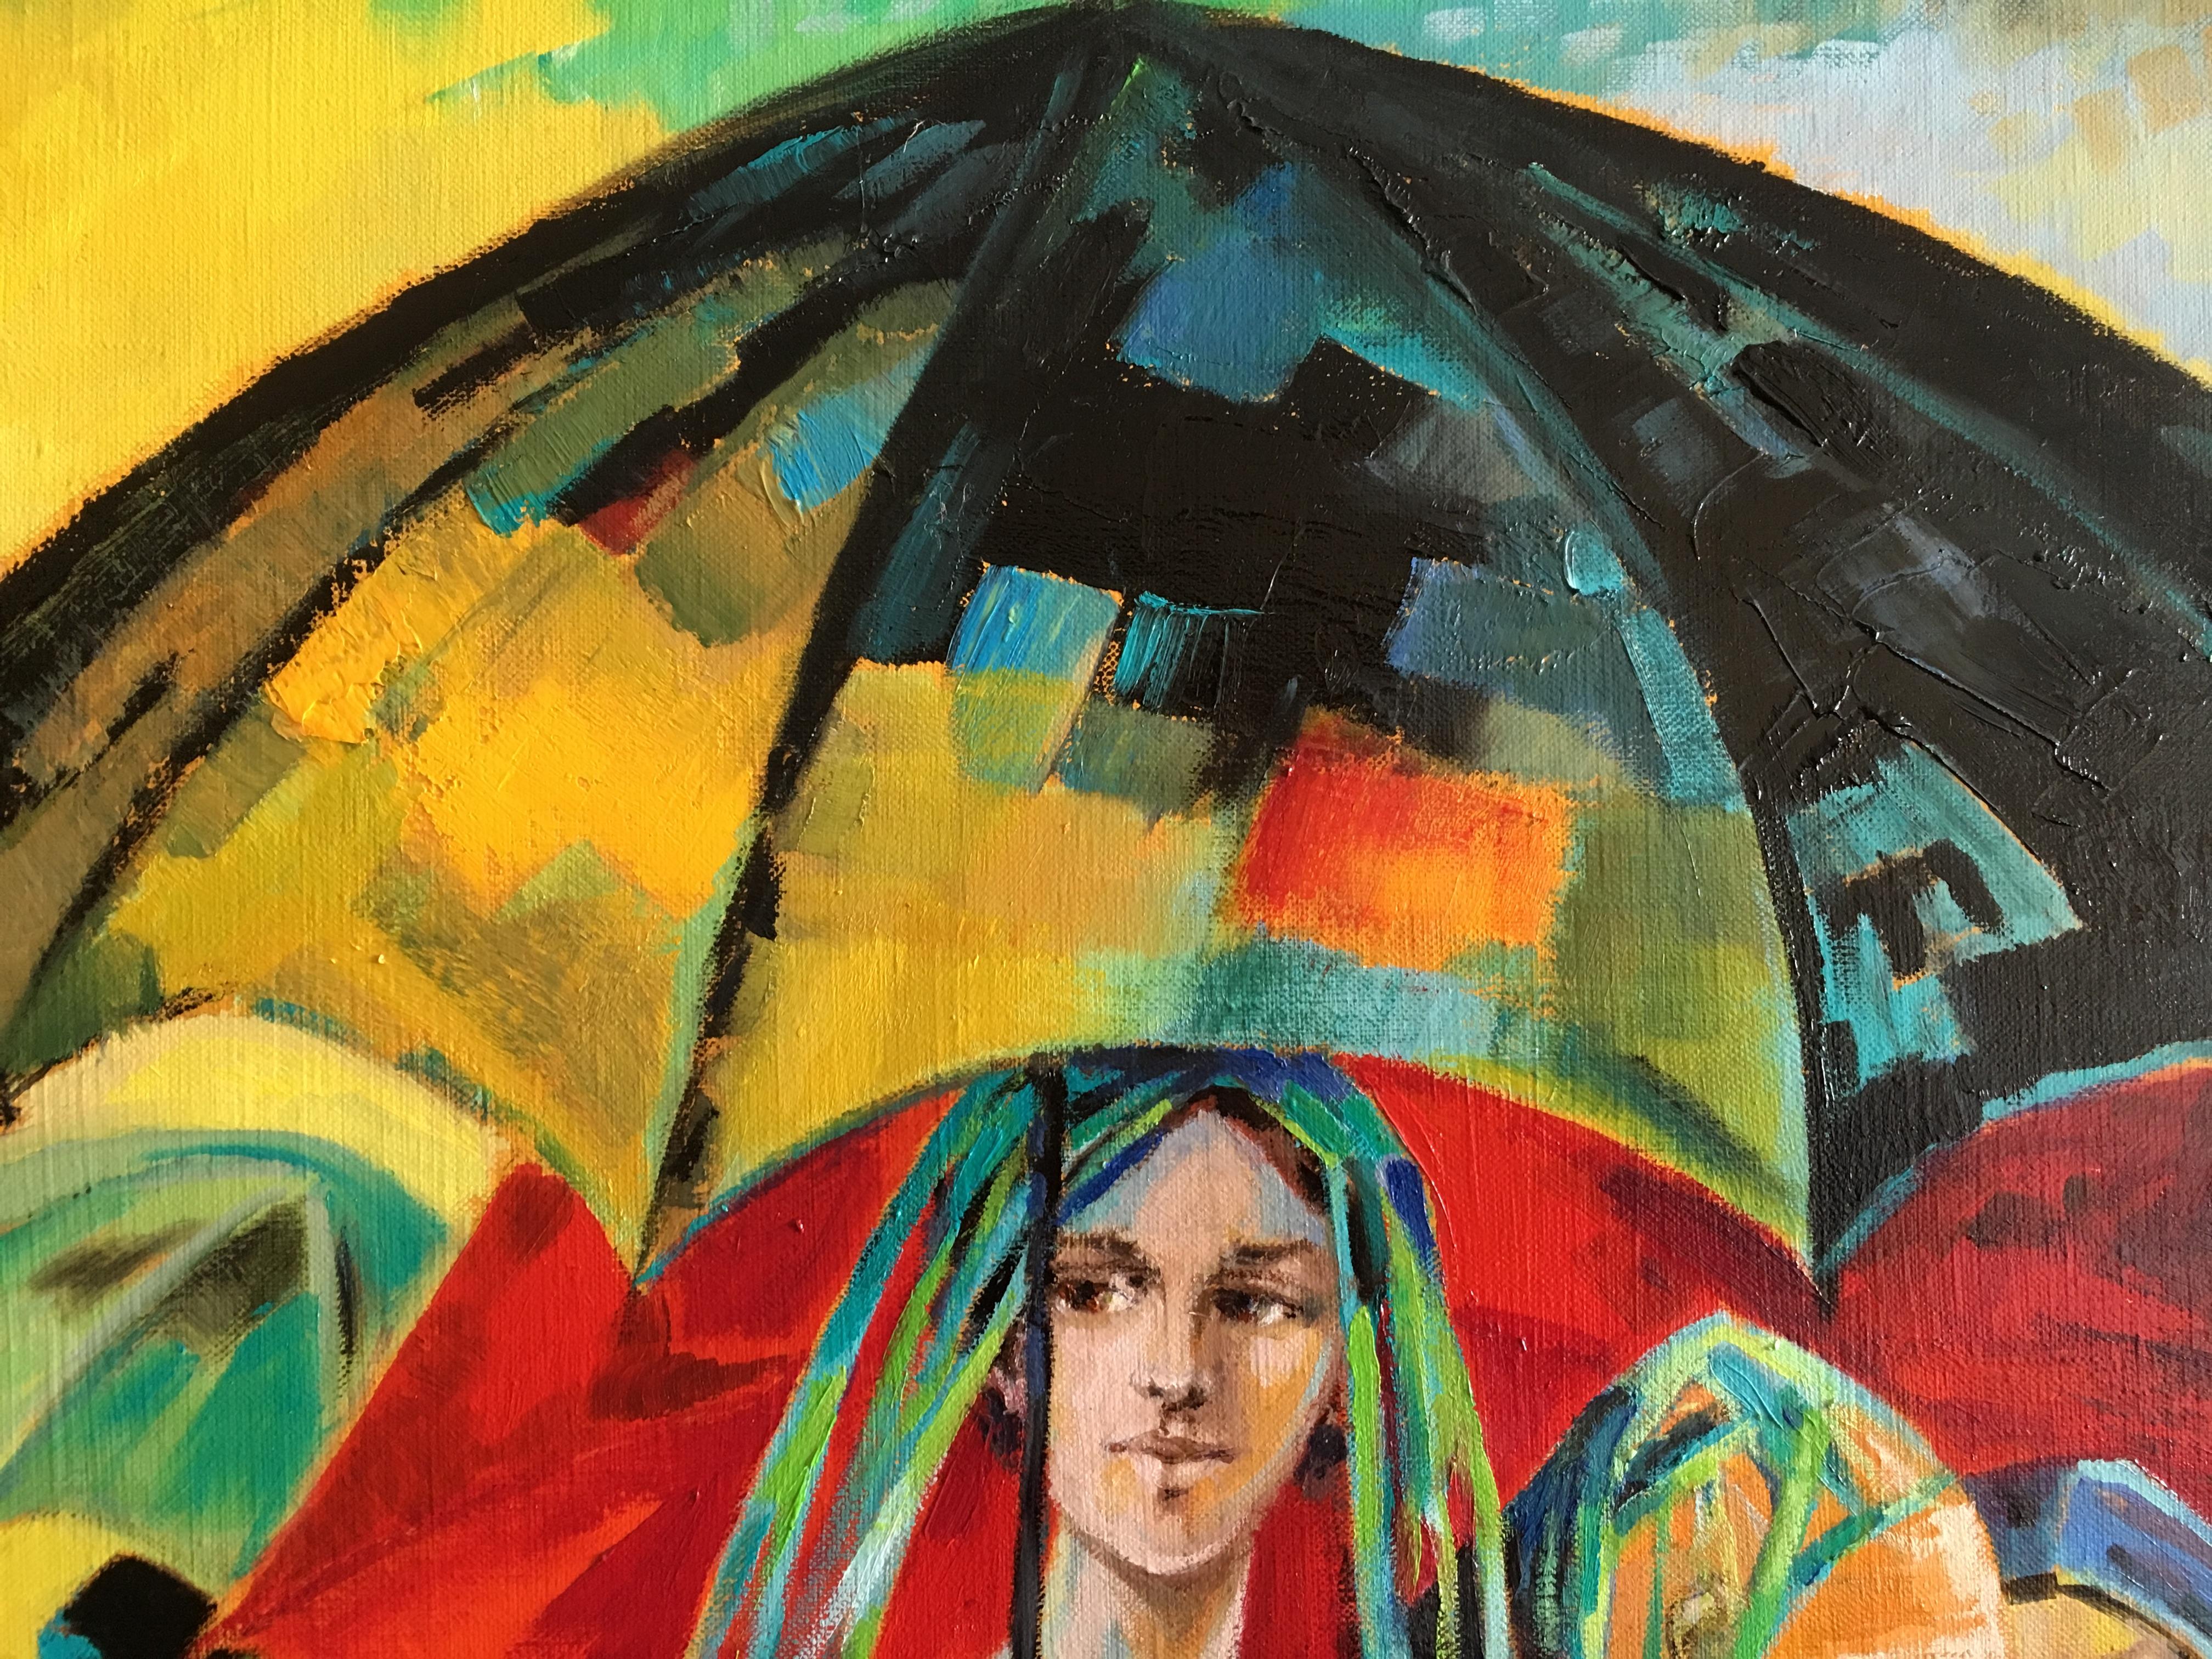 The umbrellas, oil on canvas, expressionist style 1